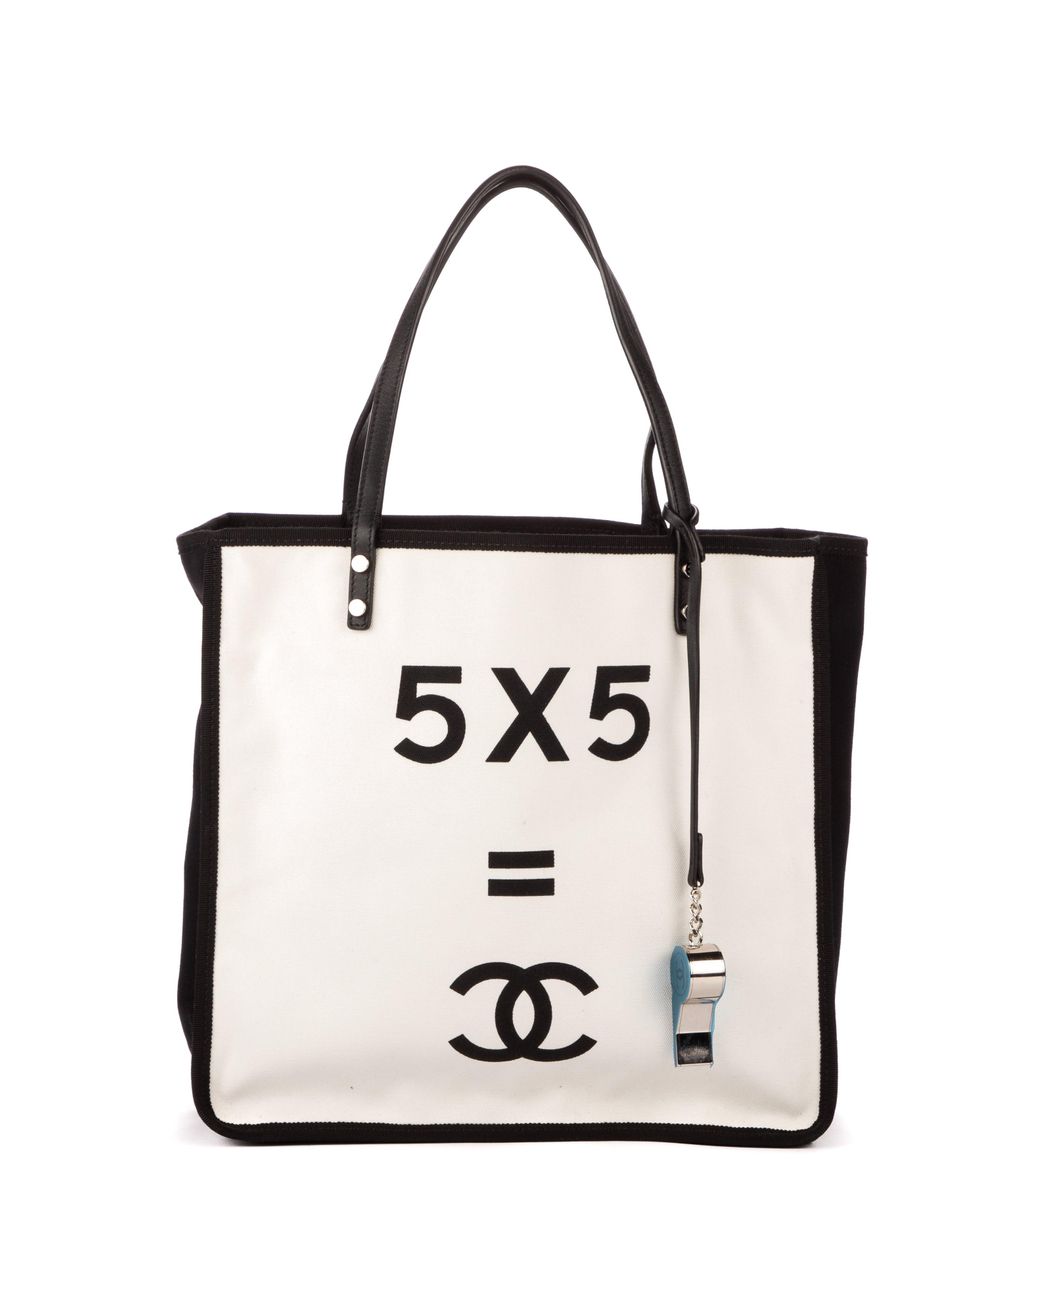 Sold at Auction: CHANEL 5X5 BAG WITH WHISTLE